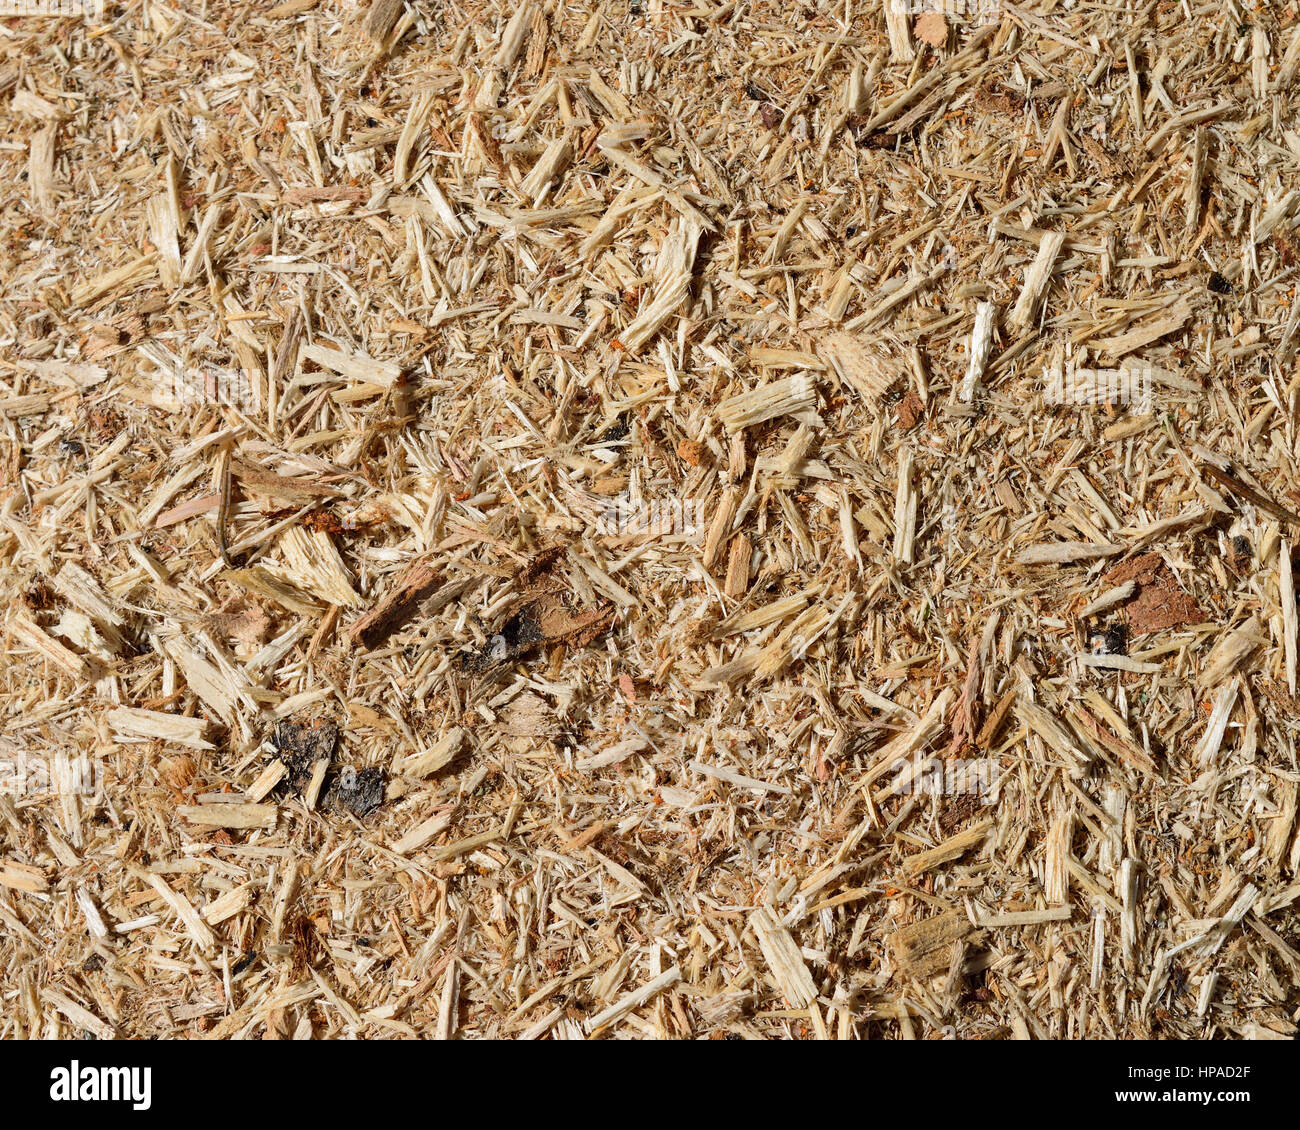 Sawdust and Wood Chip Background Stock Photo